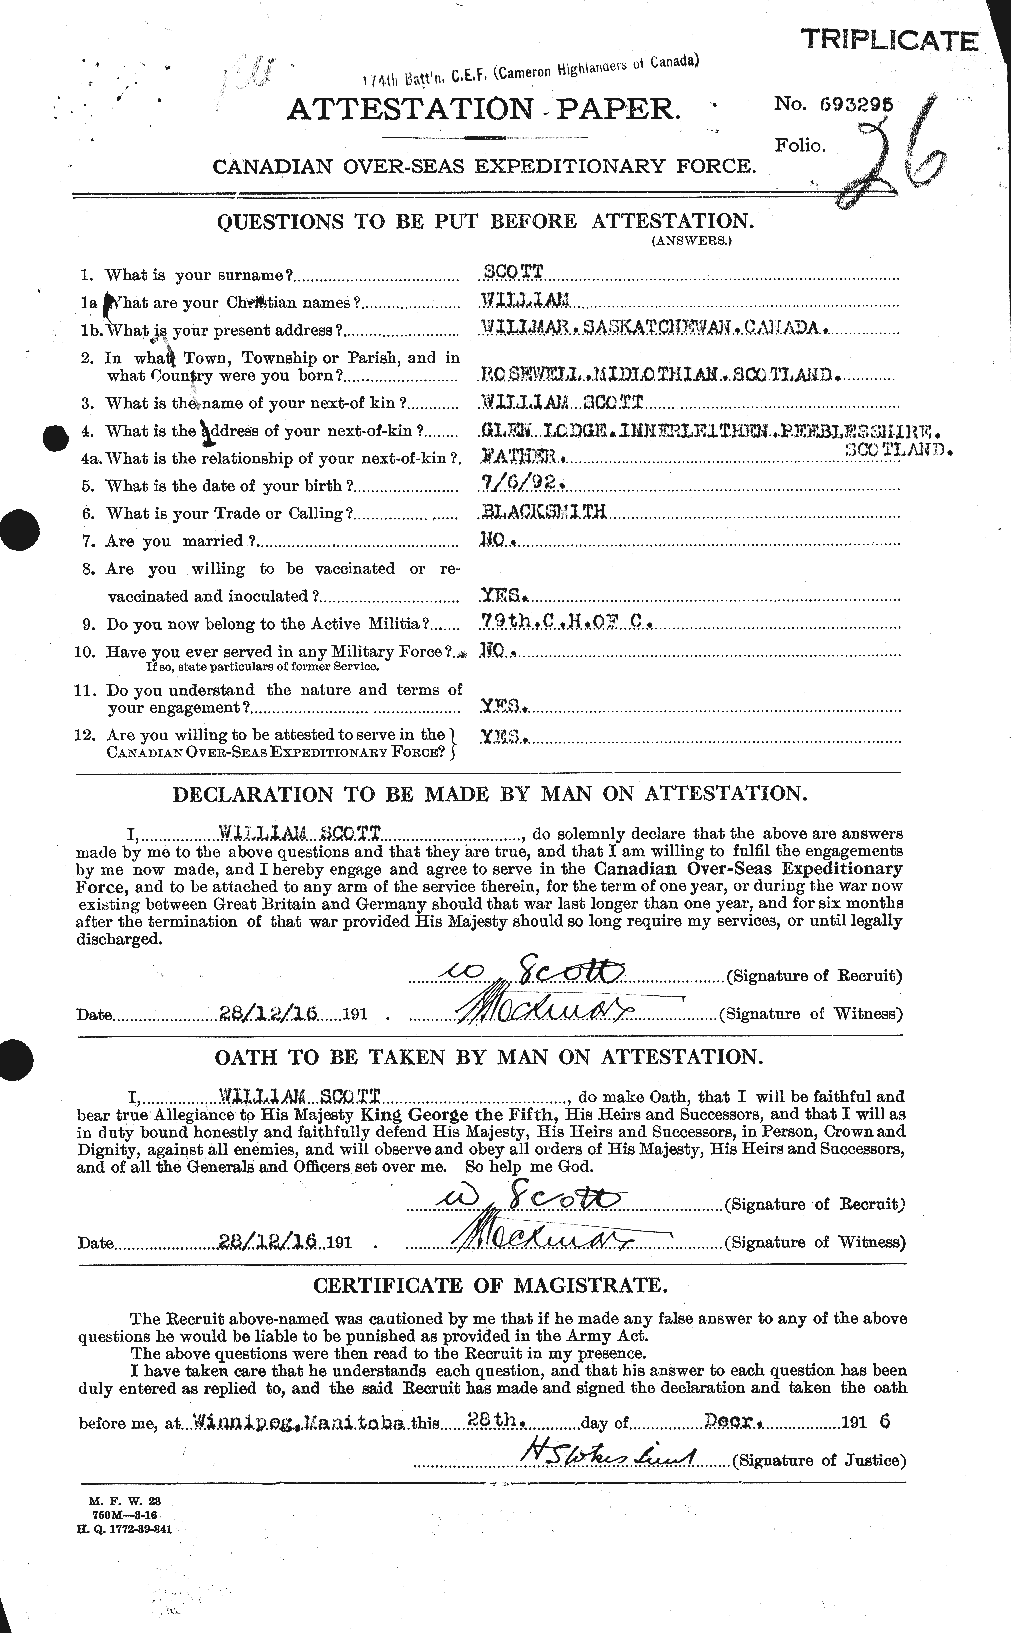 Personnel Records of the First World War - CEF 087365a